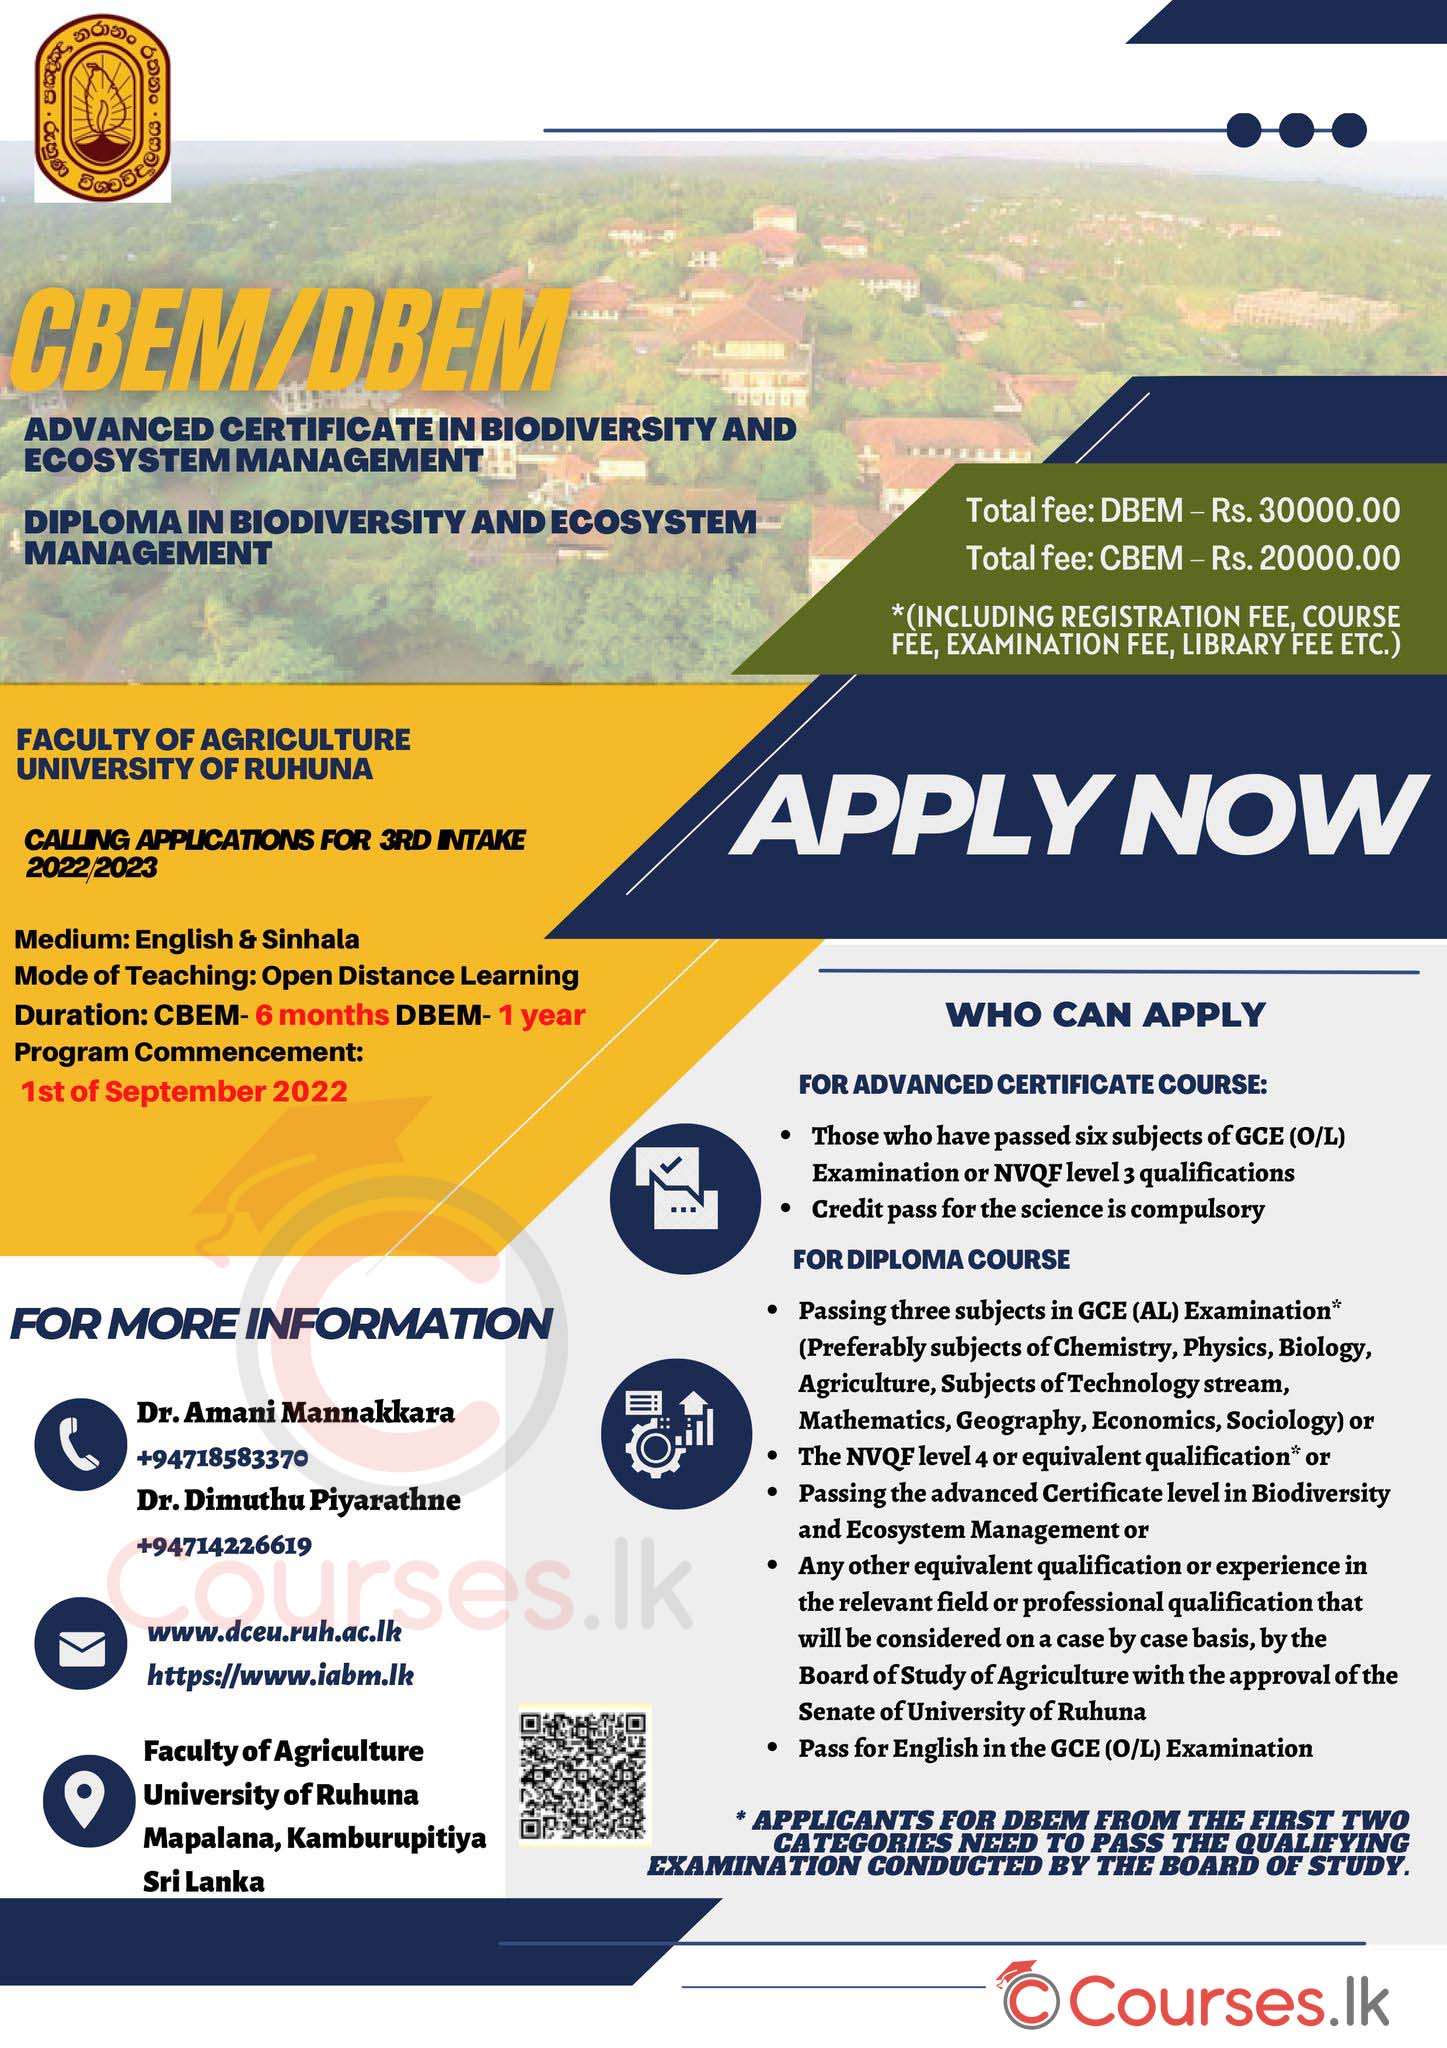 Diploma / Advanced Certificate in Biodiversity and Ecosystem Management - University of Ruhuna